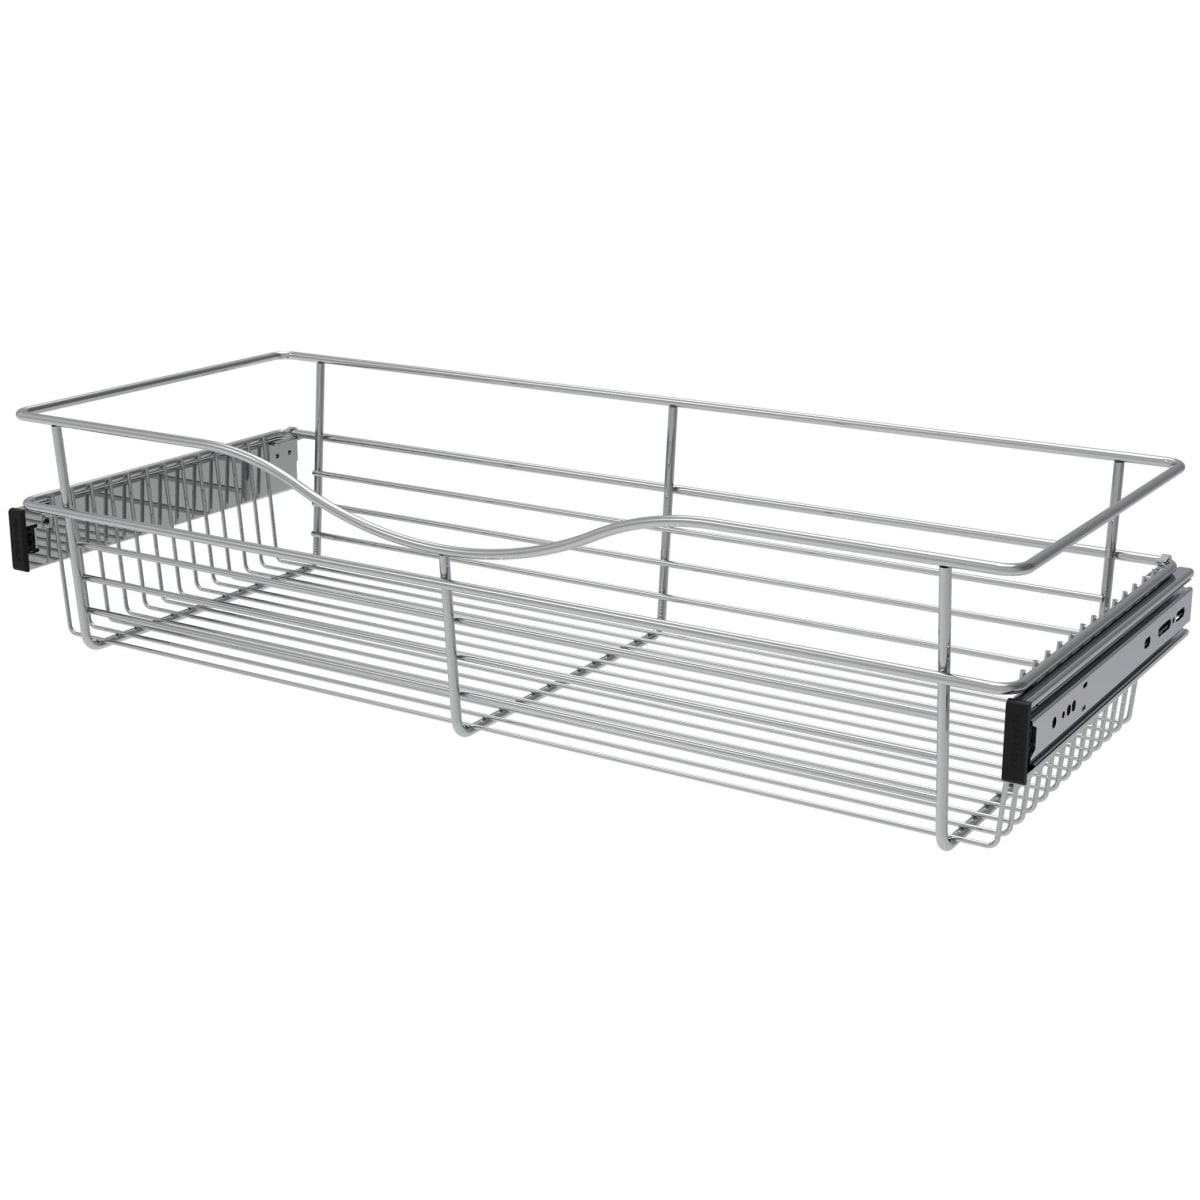 Rev-A-Shelf Pull Out Undersink U-Shaped Wire Basket with Soft Close Slides